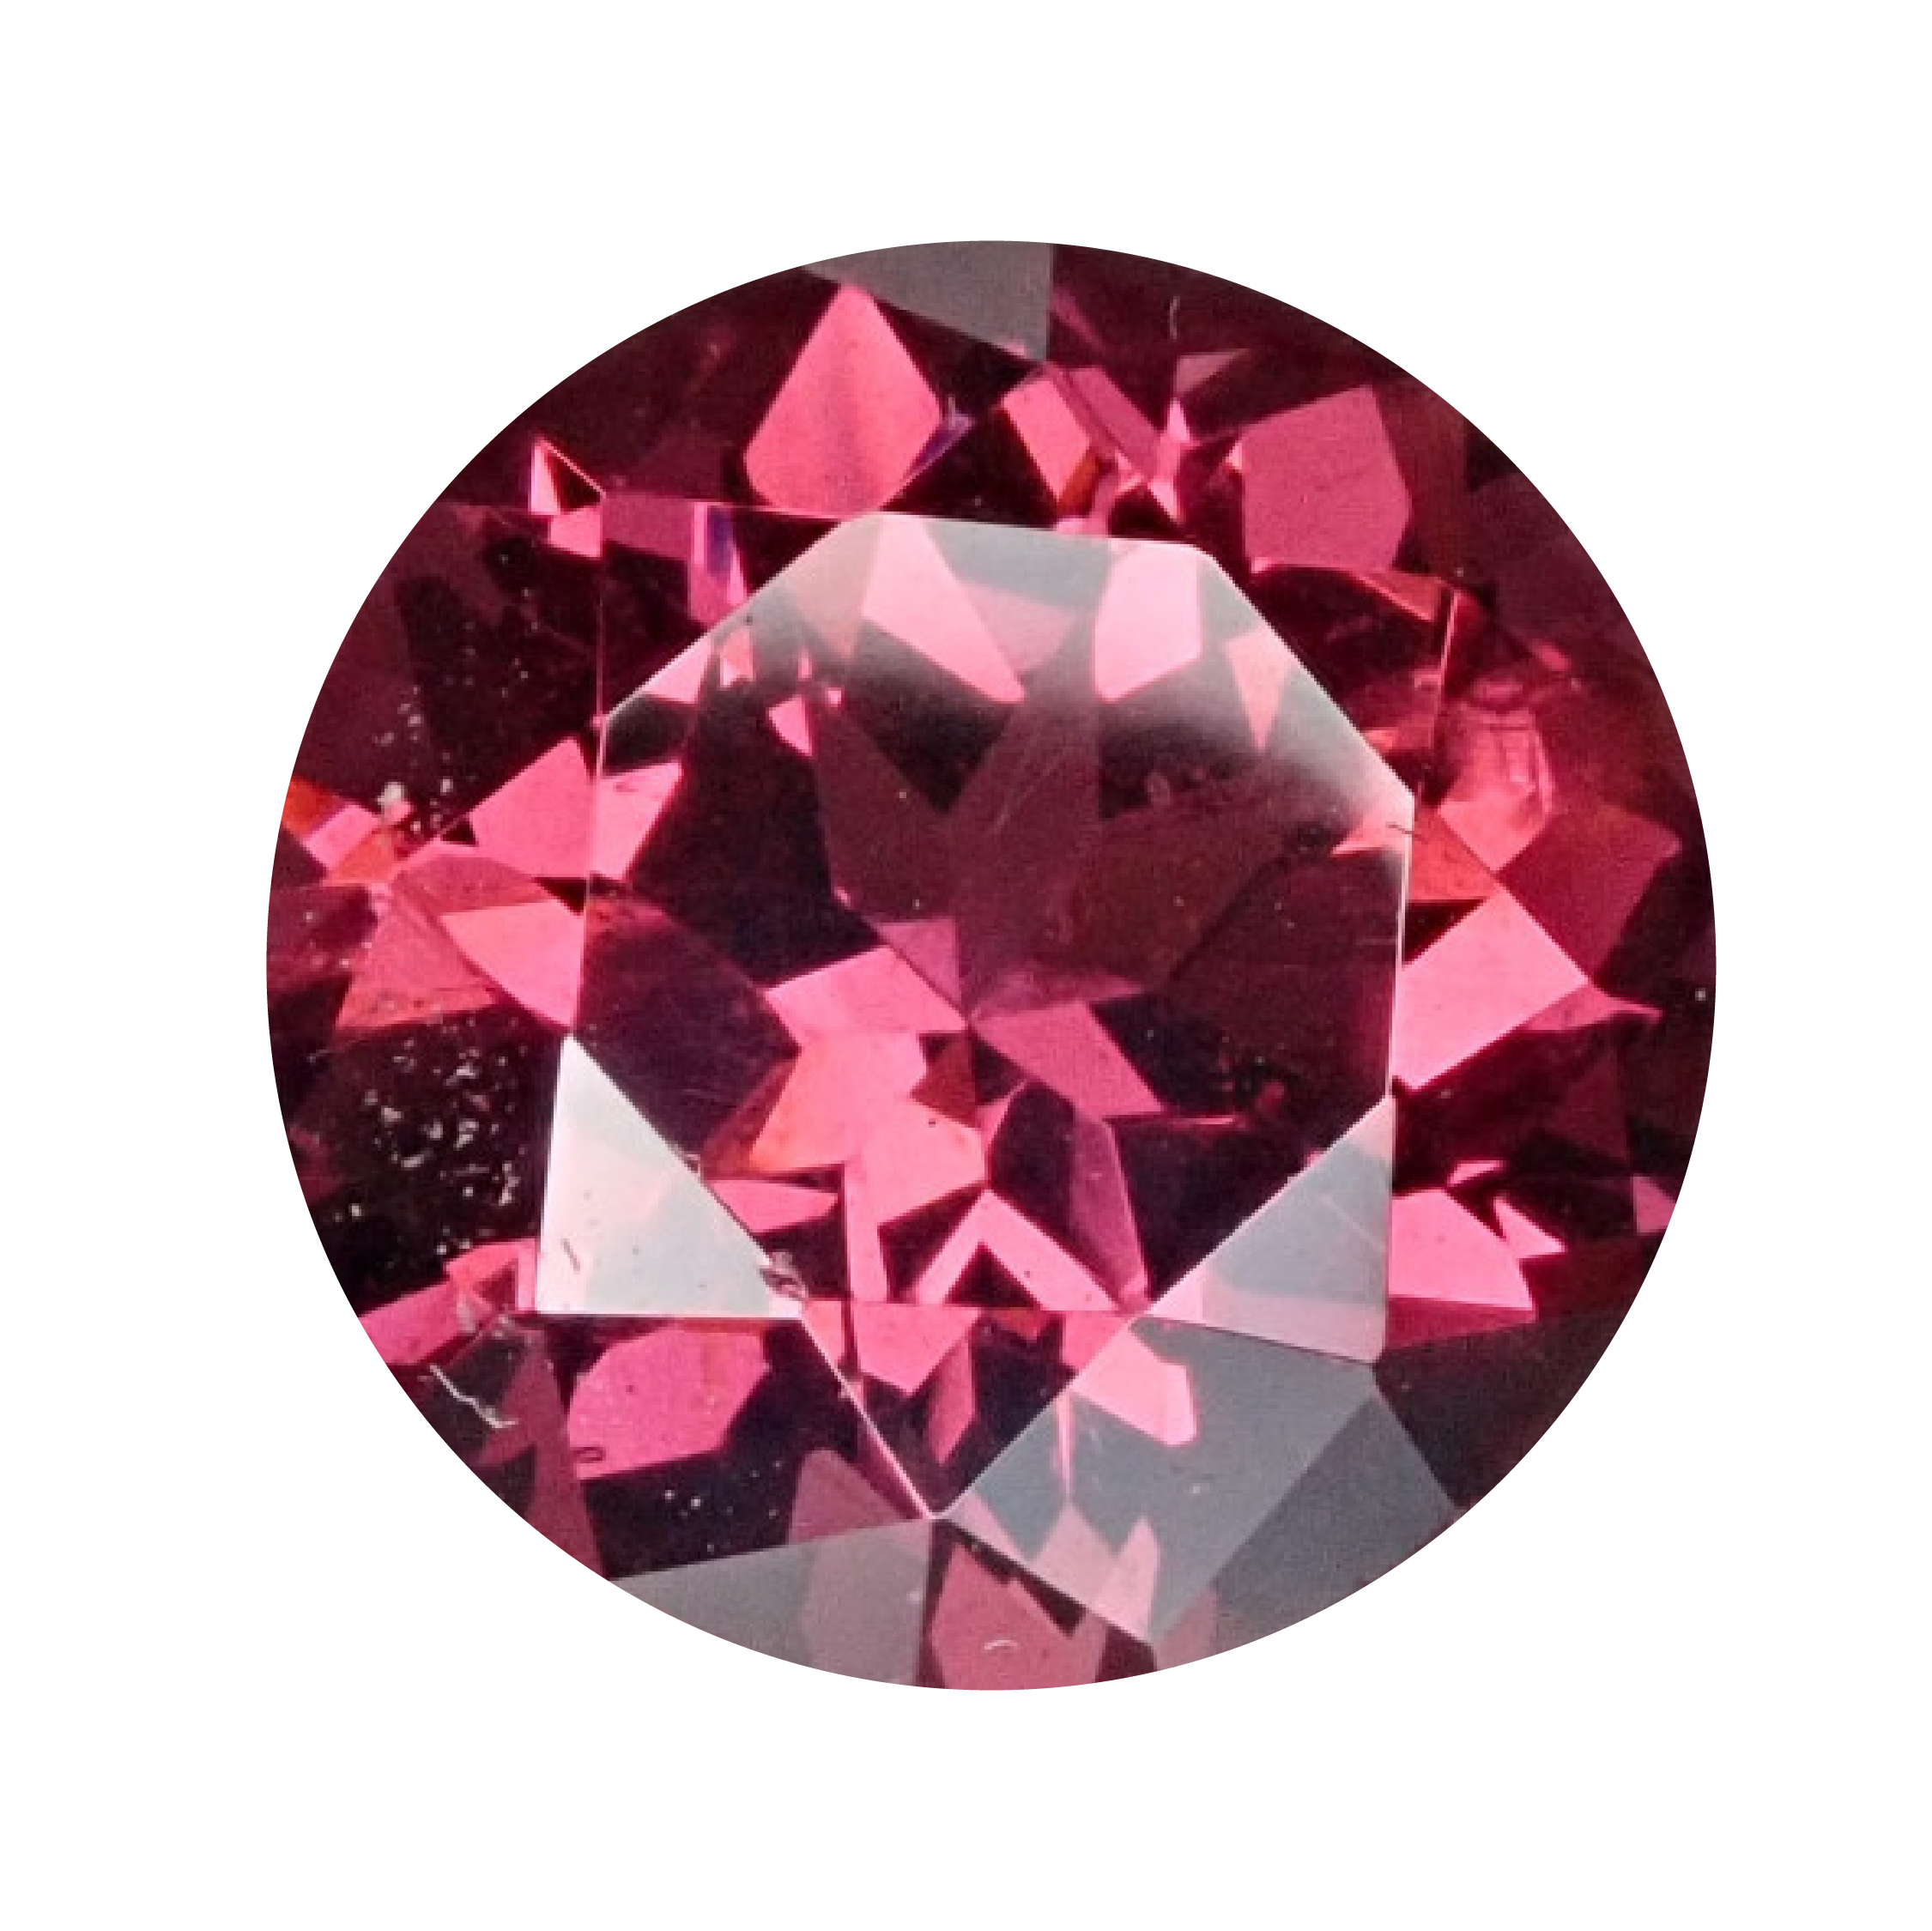 August (Spinel)